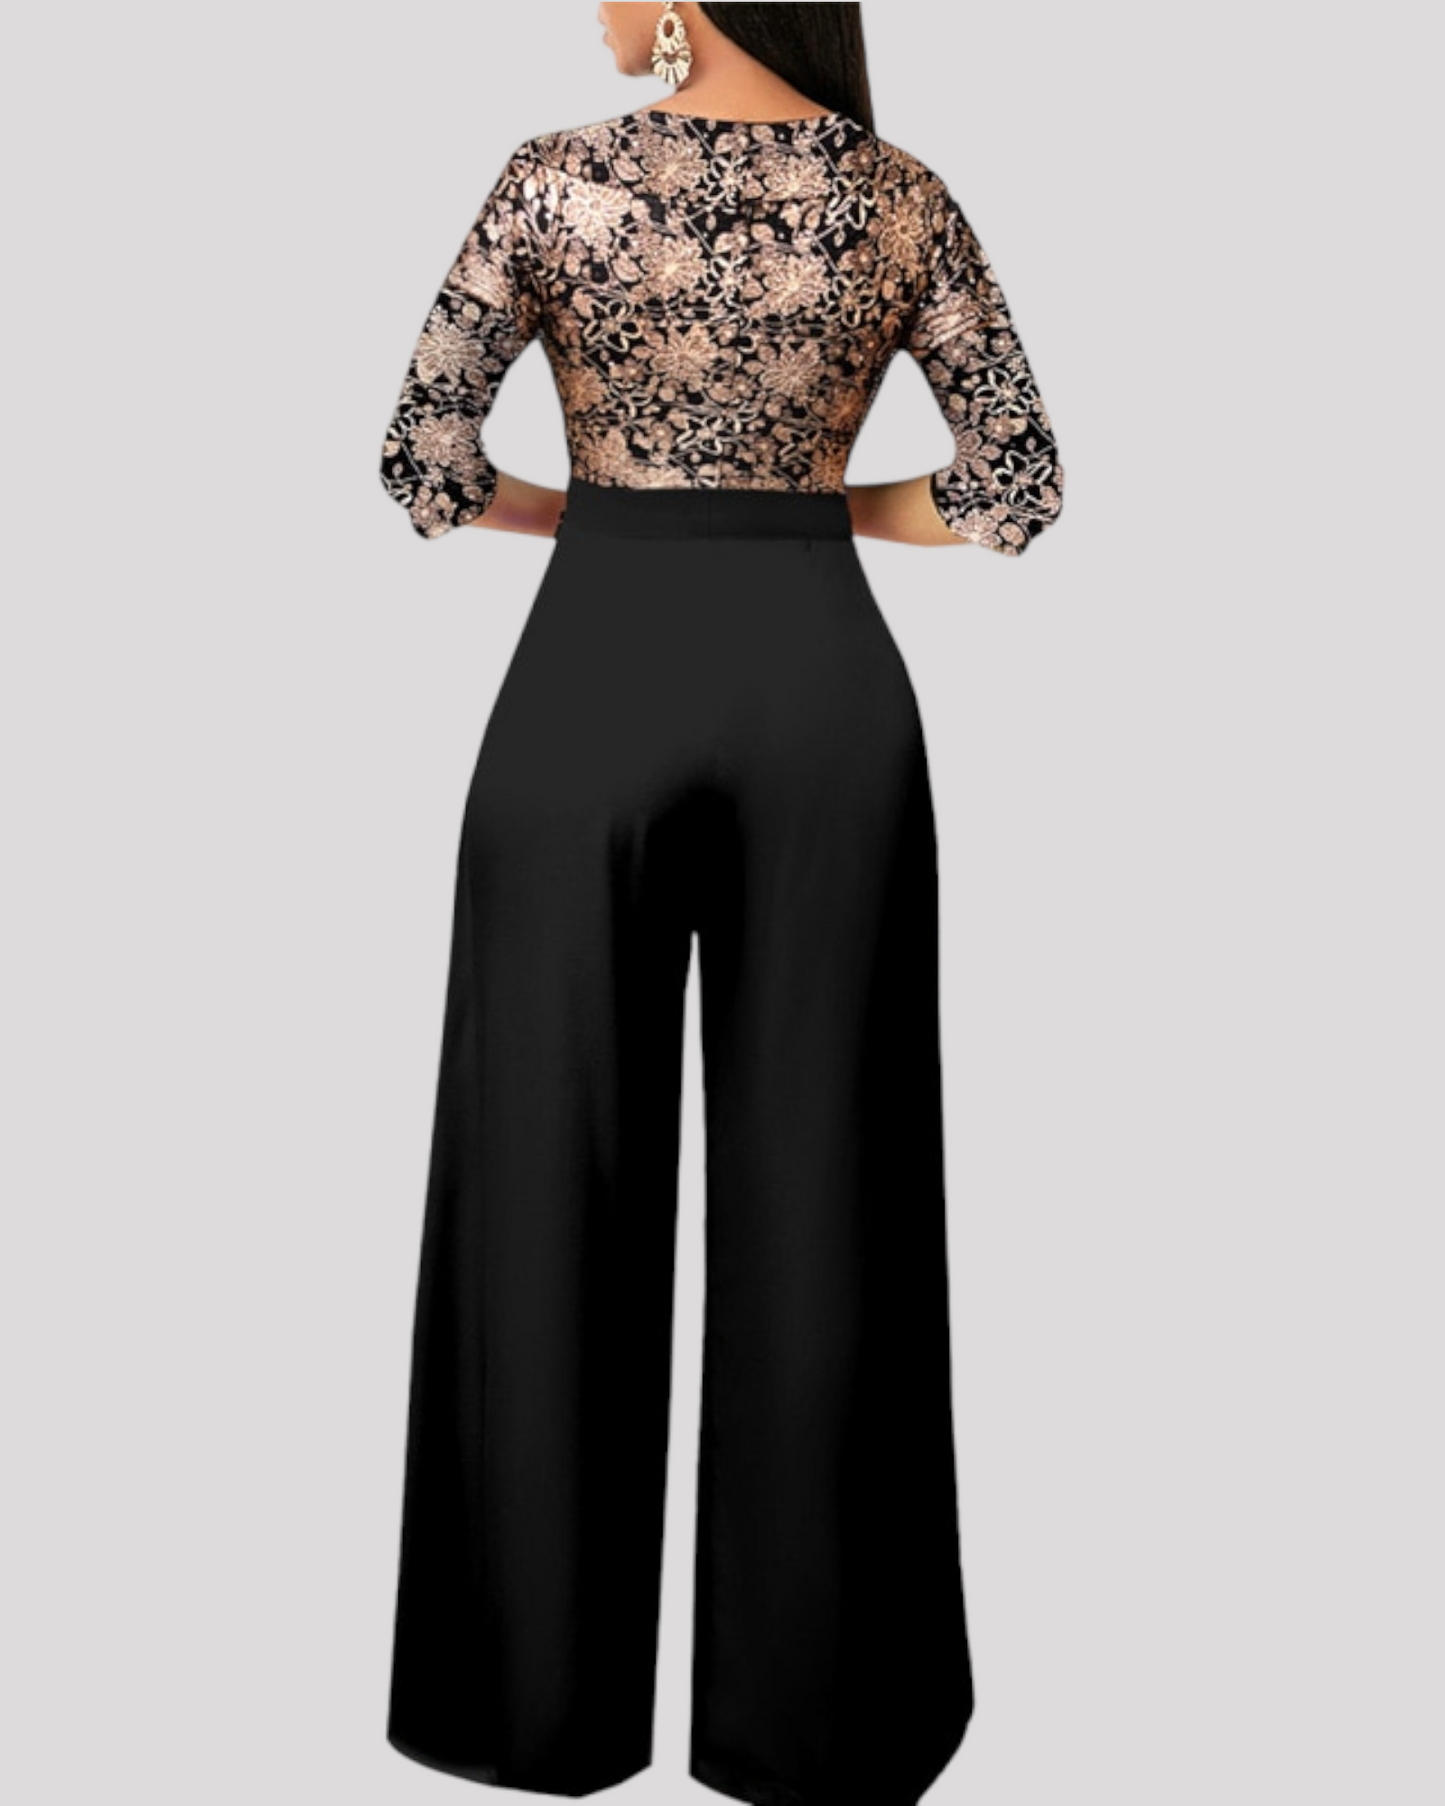 V Neck Women's Pants Suit with 3/4 Sleeves